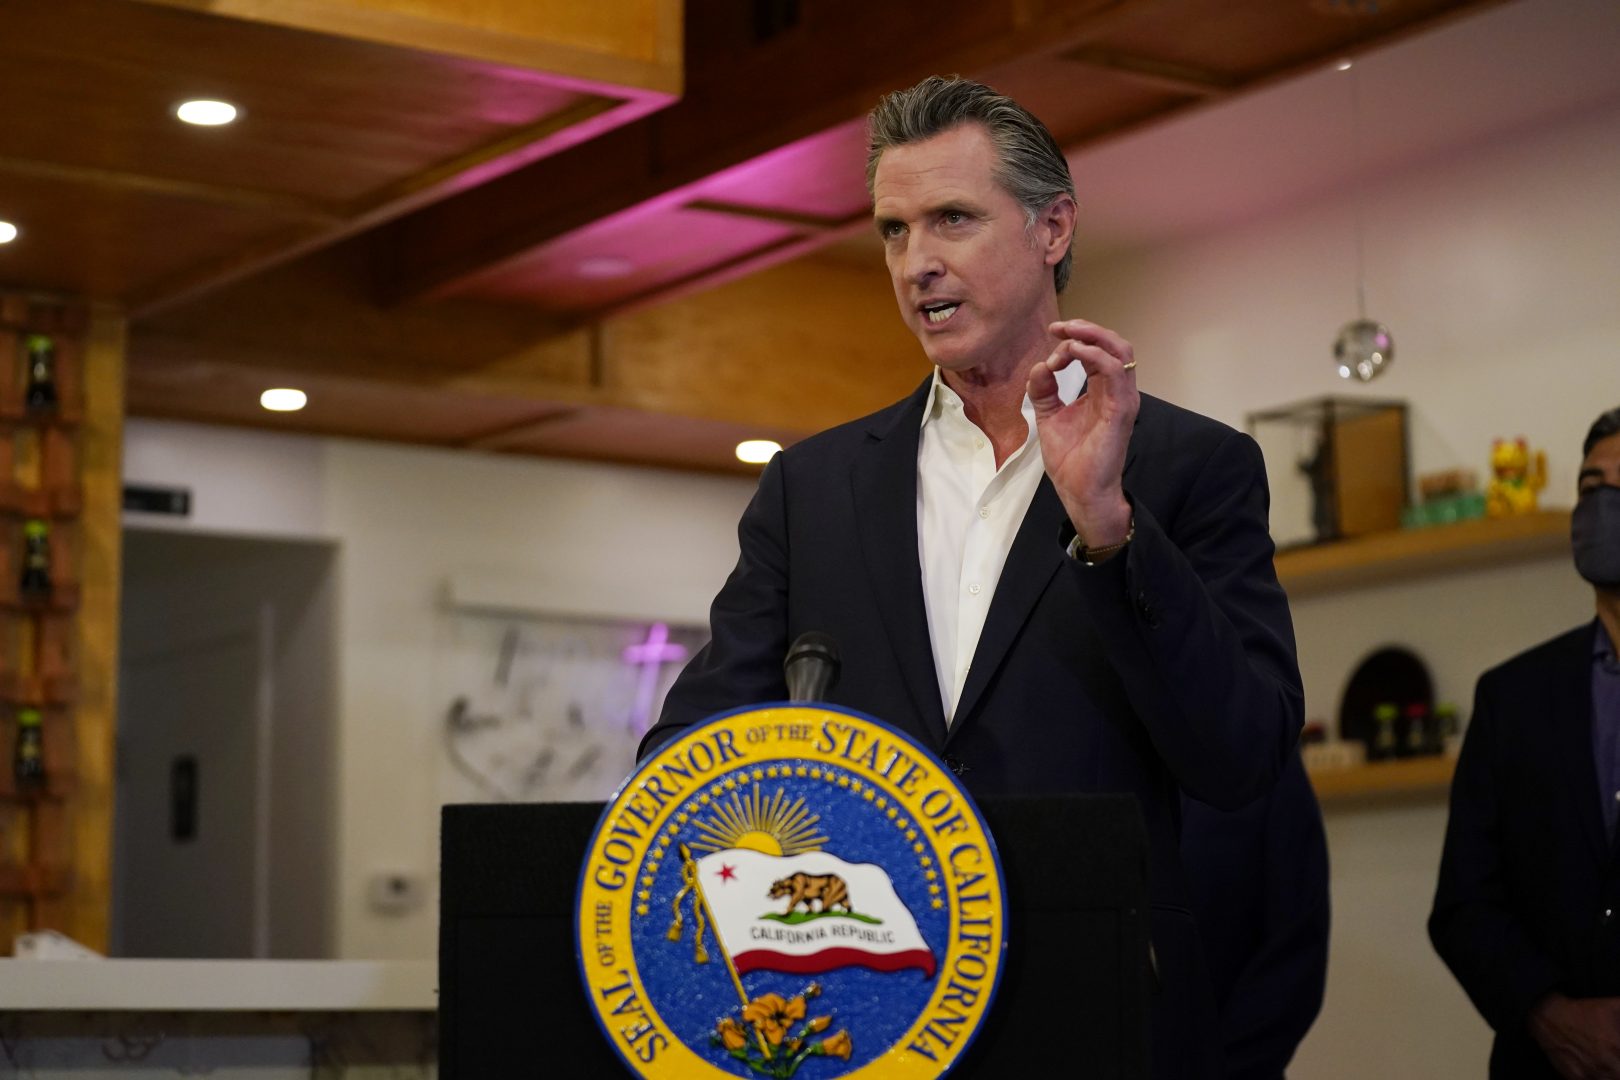 FILE PHOTO: California Gov. Gavin Newsom speaks at Hanzo Sushi Thursday, April 29, 2021, in San Fernando, Calif. Businesses could be spared billions of dollars of higher taxes in coming years as a result of federal coronavirus relief funds flowing to the states. Newsom announced a budget plan this spring that would use $1.1 billion from the latest federal COVID-19 relief law to bolster a depleted unemployment compensation accounts.